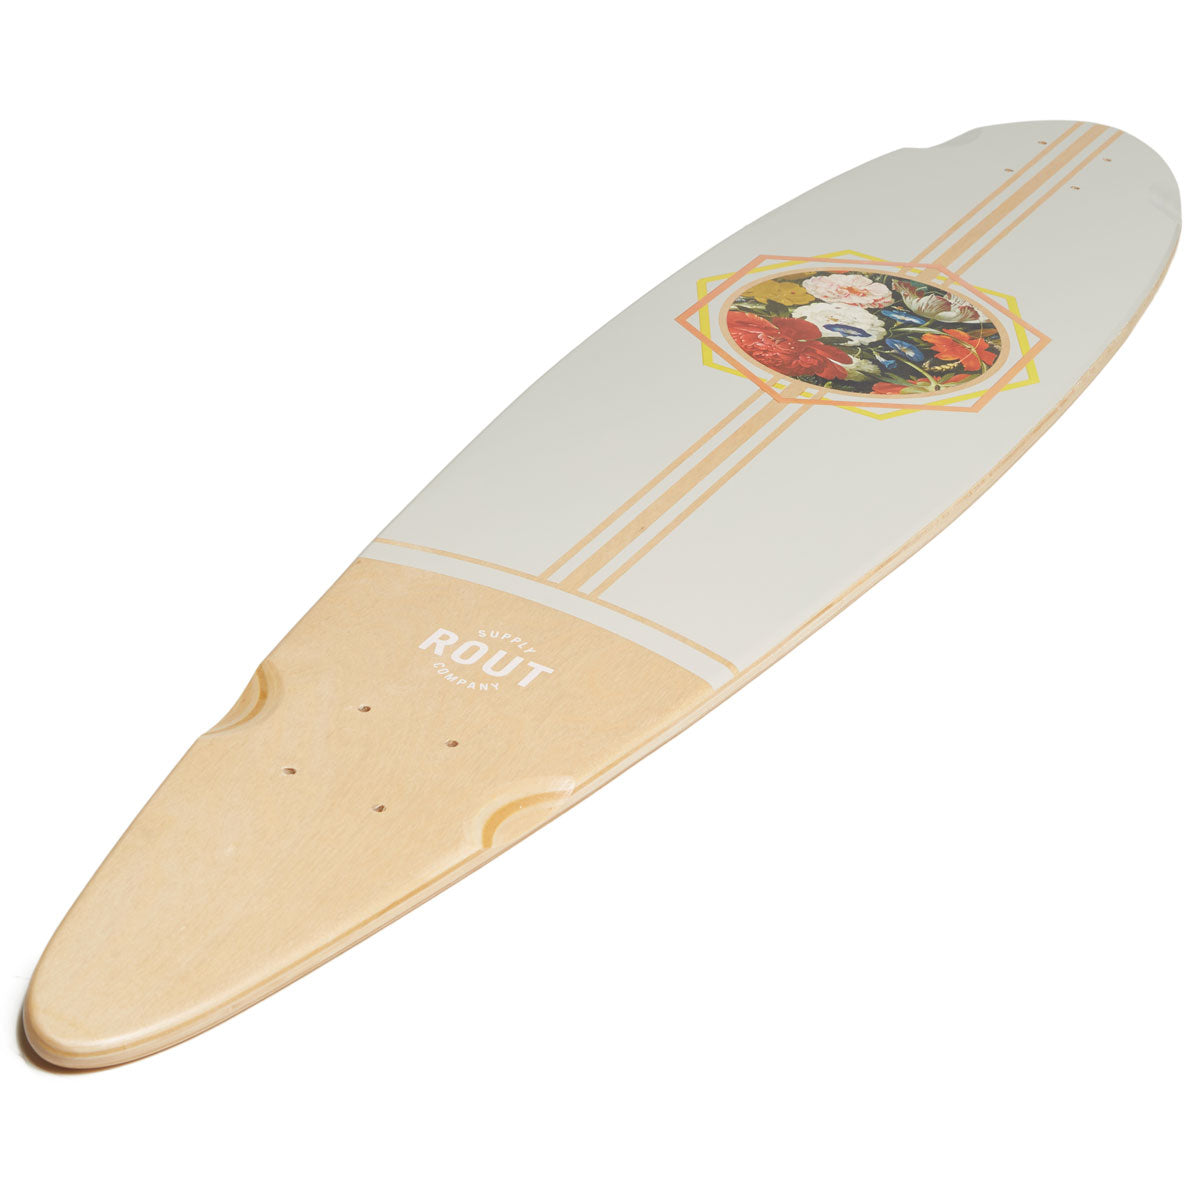 Rout Floral Pintail Longboard Complete image 4